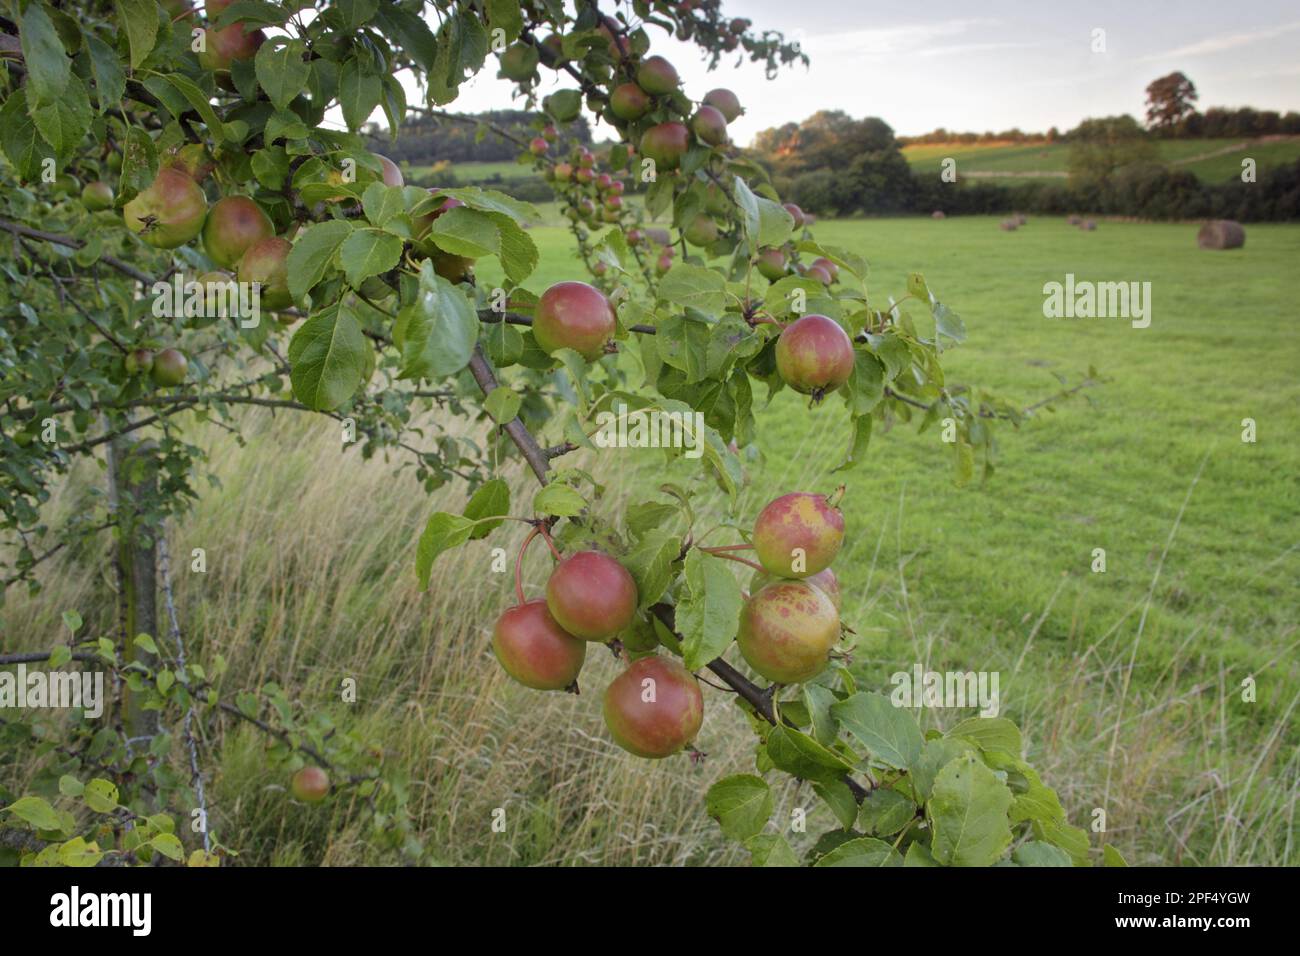 Wild Crabapple (Malus sylvestris) close-up of leaves and fruit, growing at field edge in farmland, West Yorkshire, England, United Kingdom Stock Photo